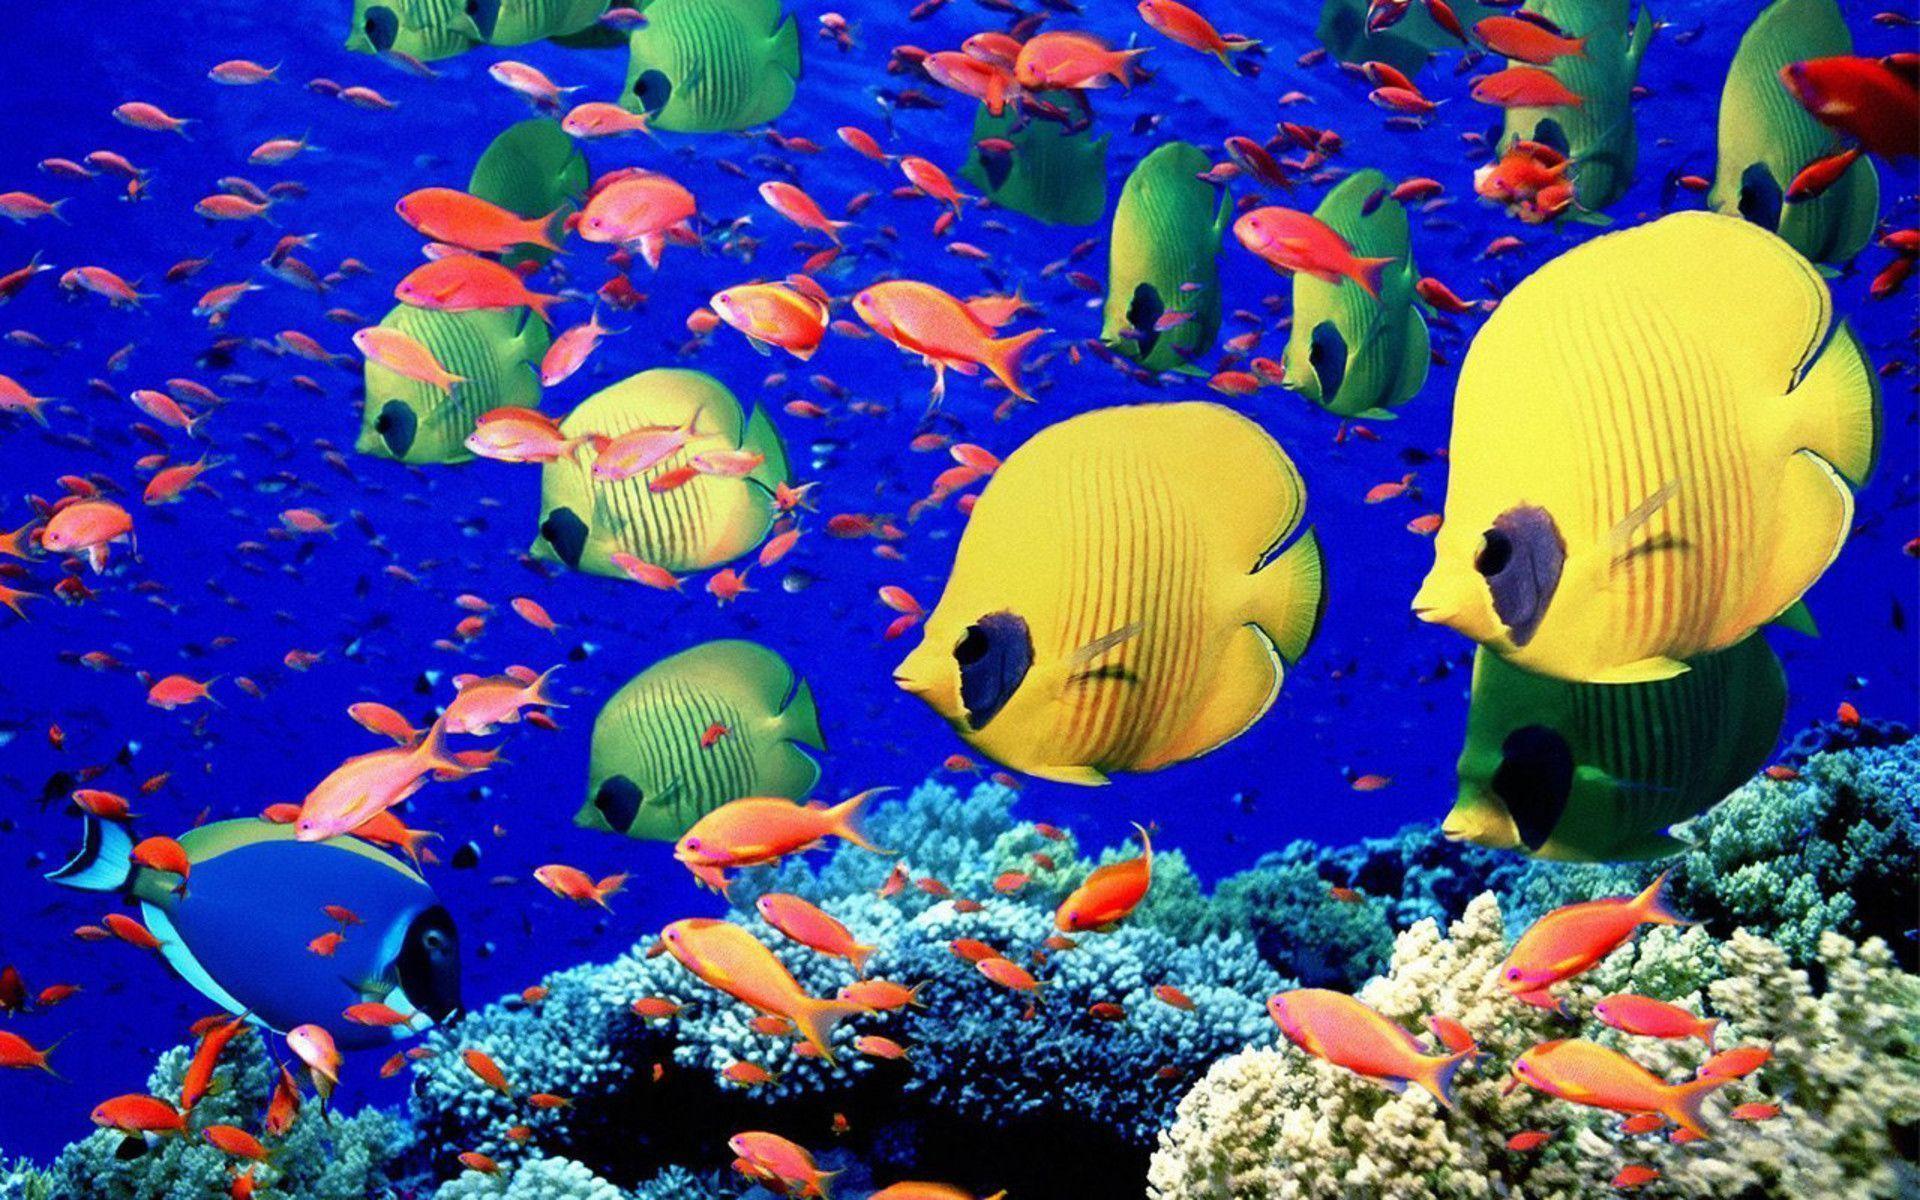 Small fishes on a reef Wallpaper. High Quality PC Dekstop Full HD